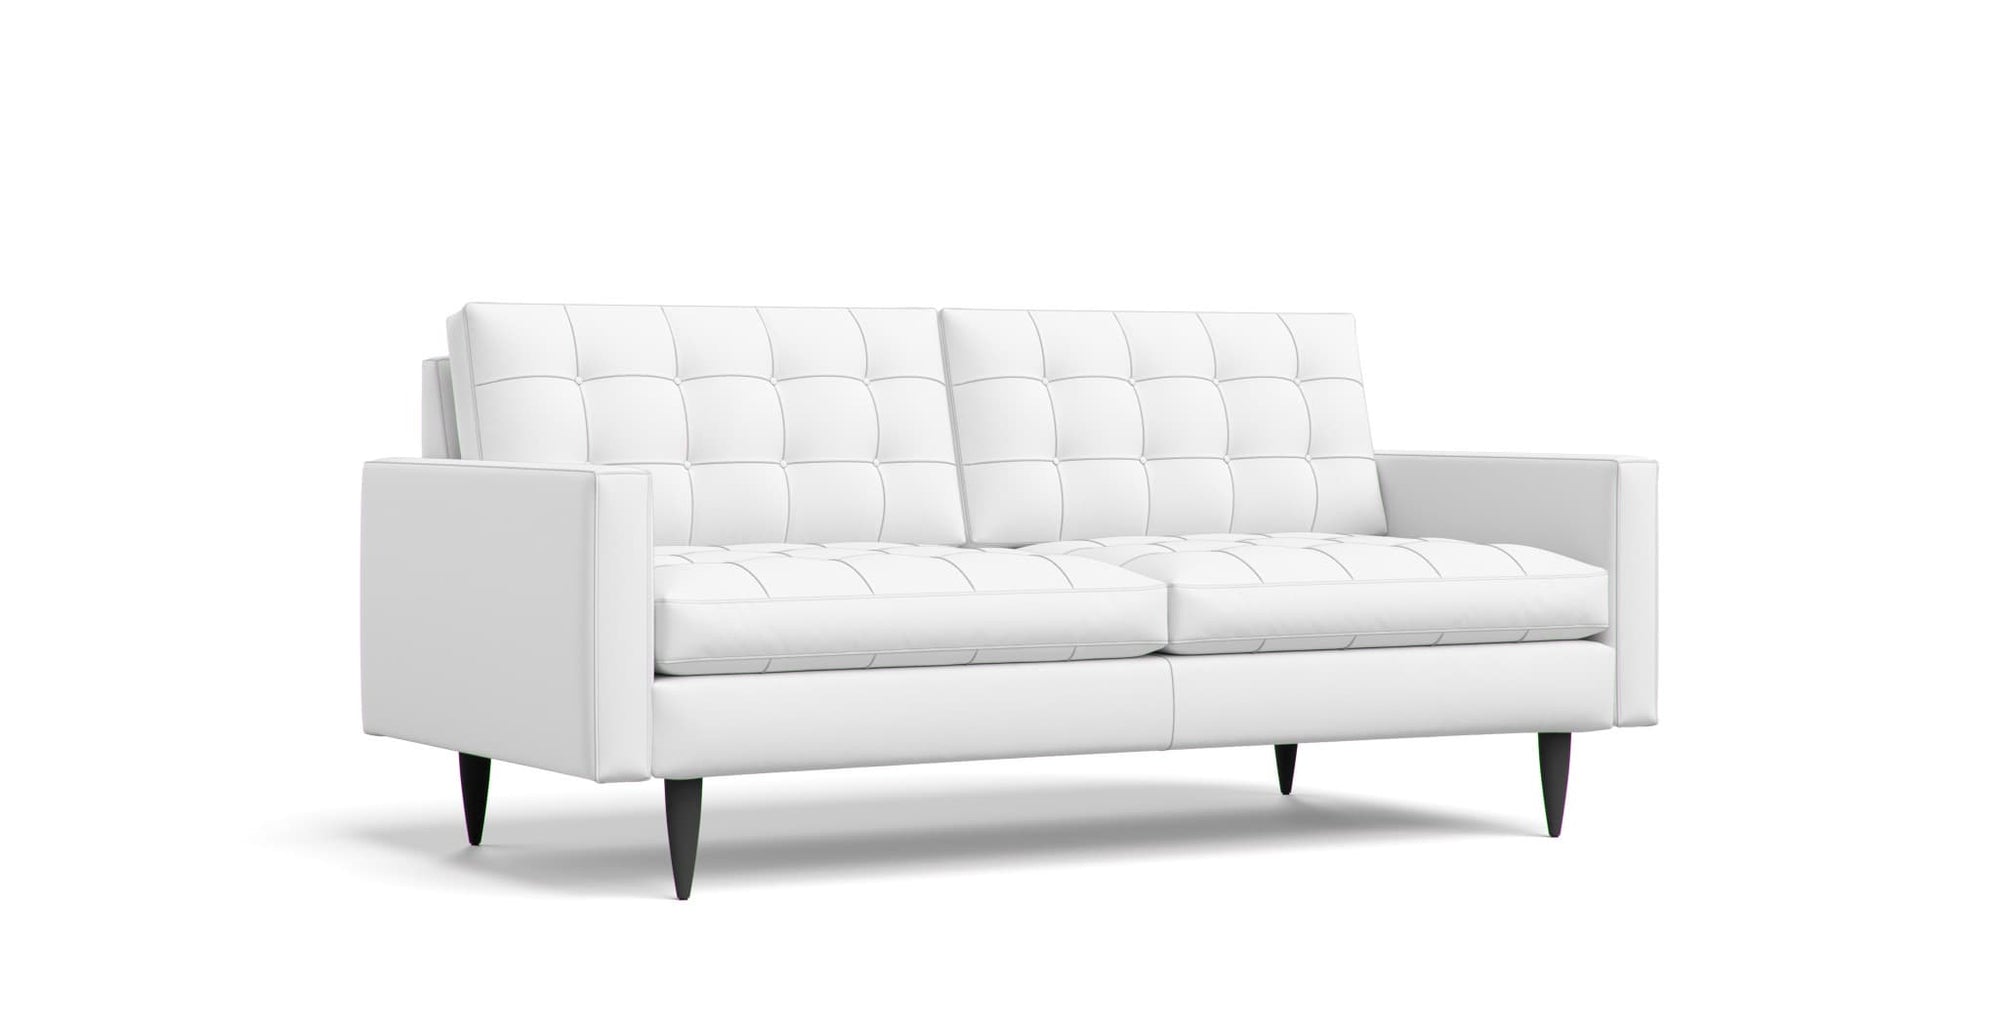 Crate and Barrel Petrie Midcentury sofa featuring white Cotton Canvas slipcover